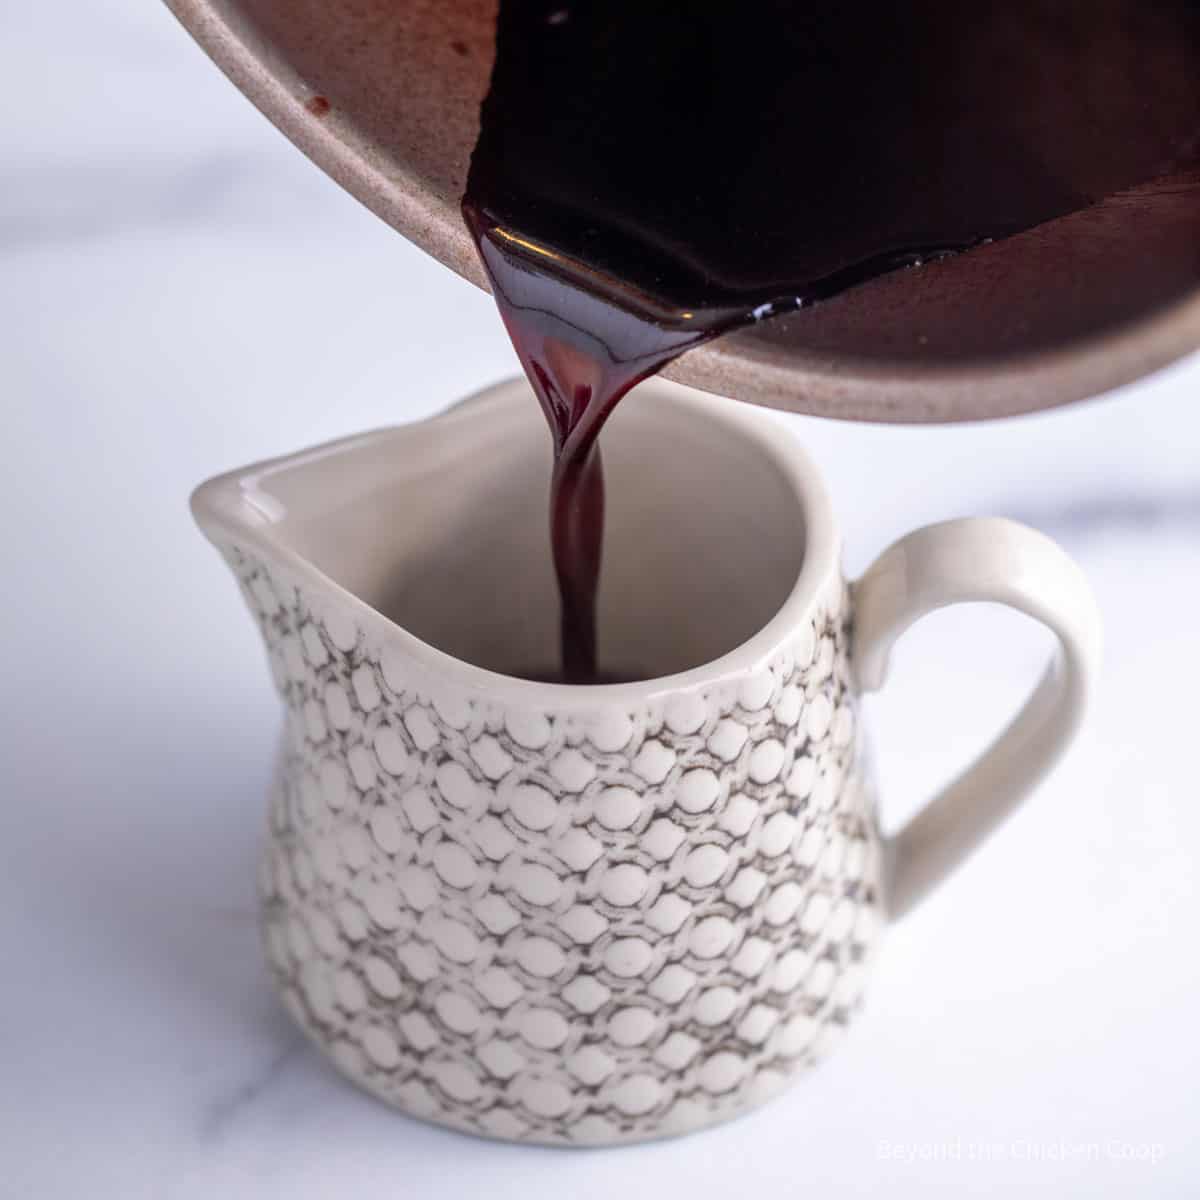 A red wine sauce being poured into a small pitcher.